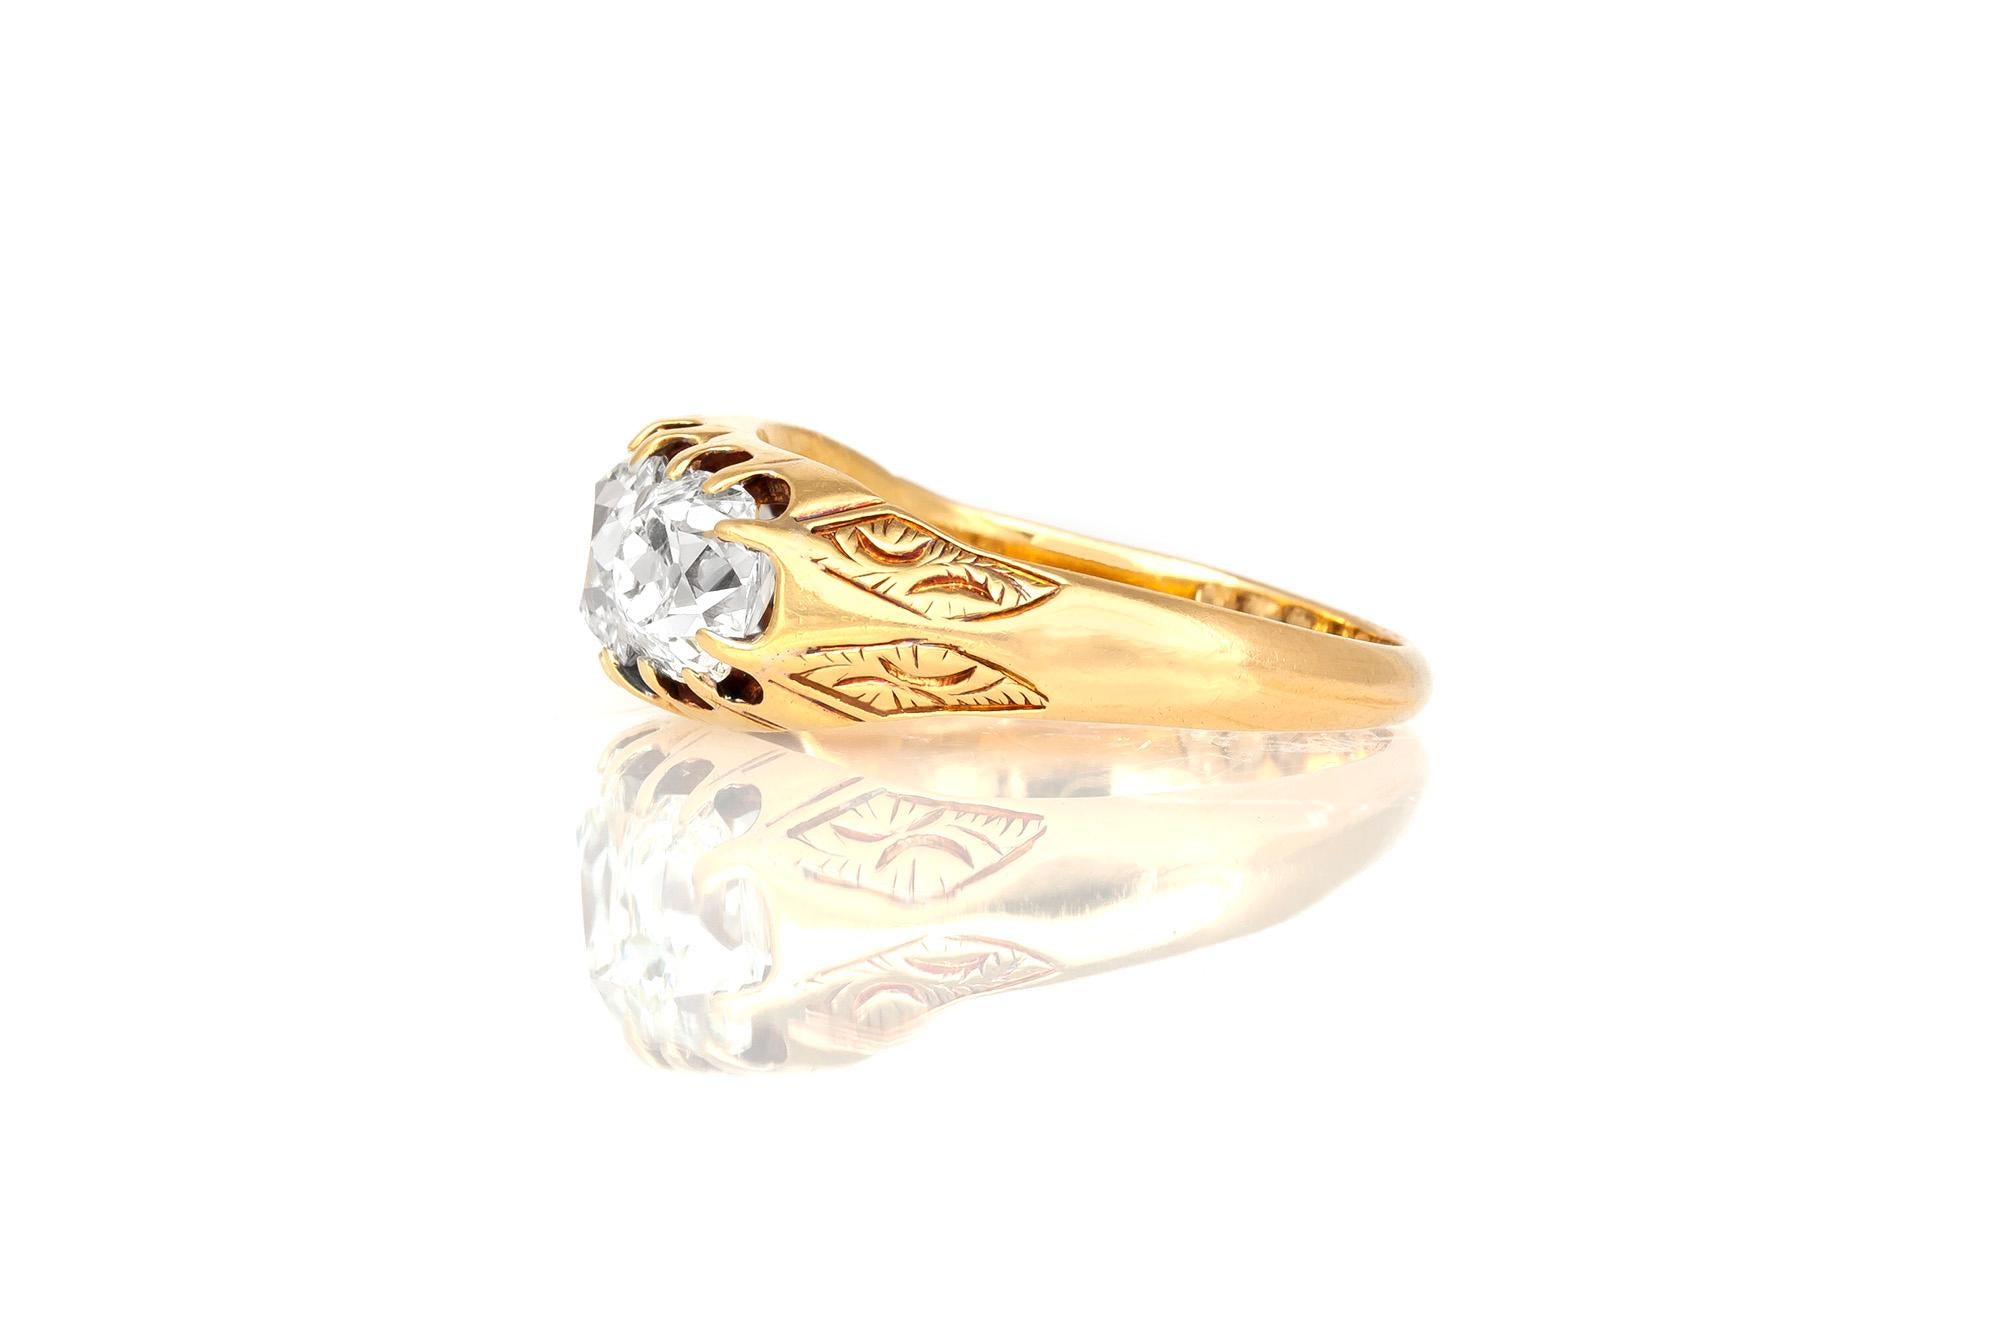 The beautoful ring is finely crafted in 18k yellow gold with three diamonds weighing approximately tota lof 4.50 carat.
Color H-I      Clarity VS-SI
circa 1900.
Easy to resize